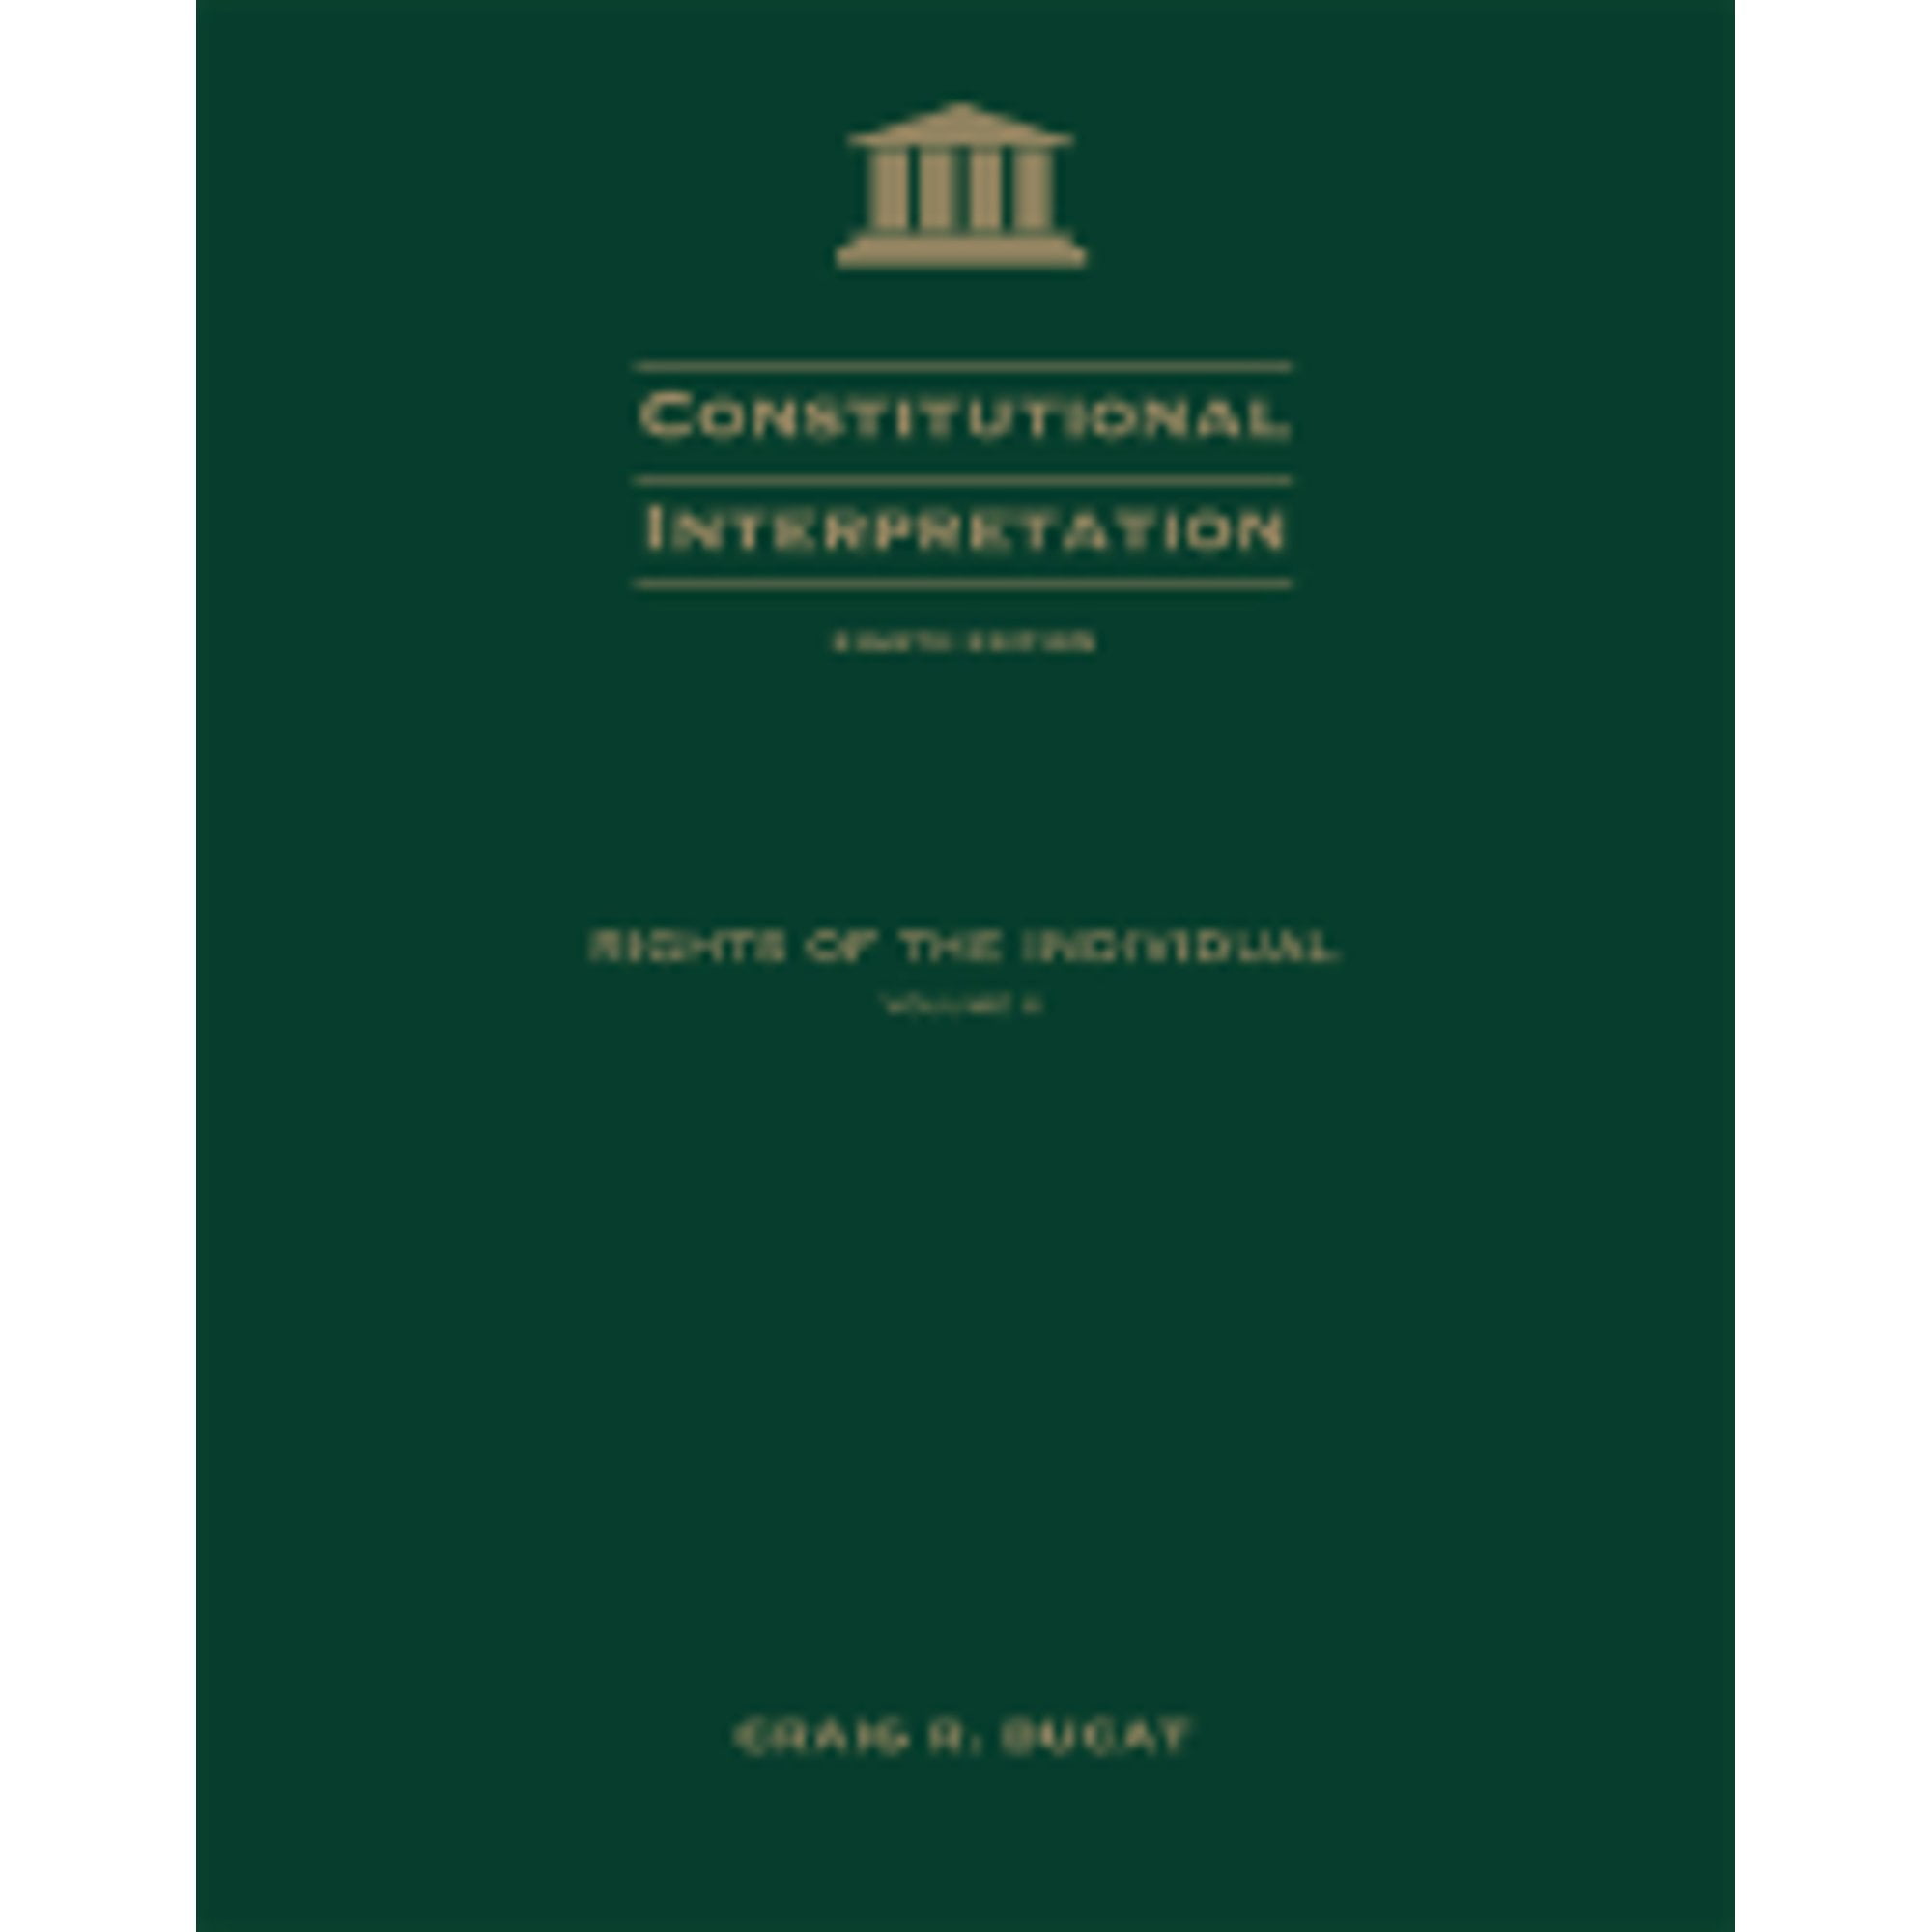 Pre-Owned Constitutional Interpretation: Rights of the Individual, Volume II (Paperback) by Craig R Ducat